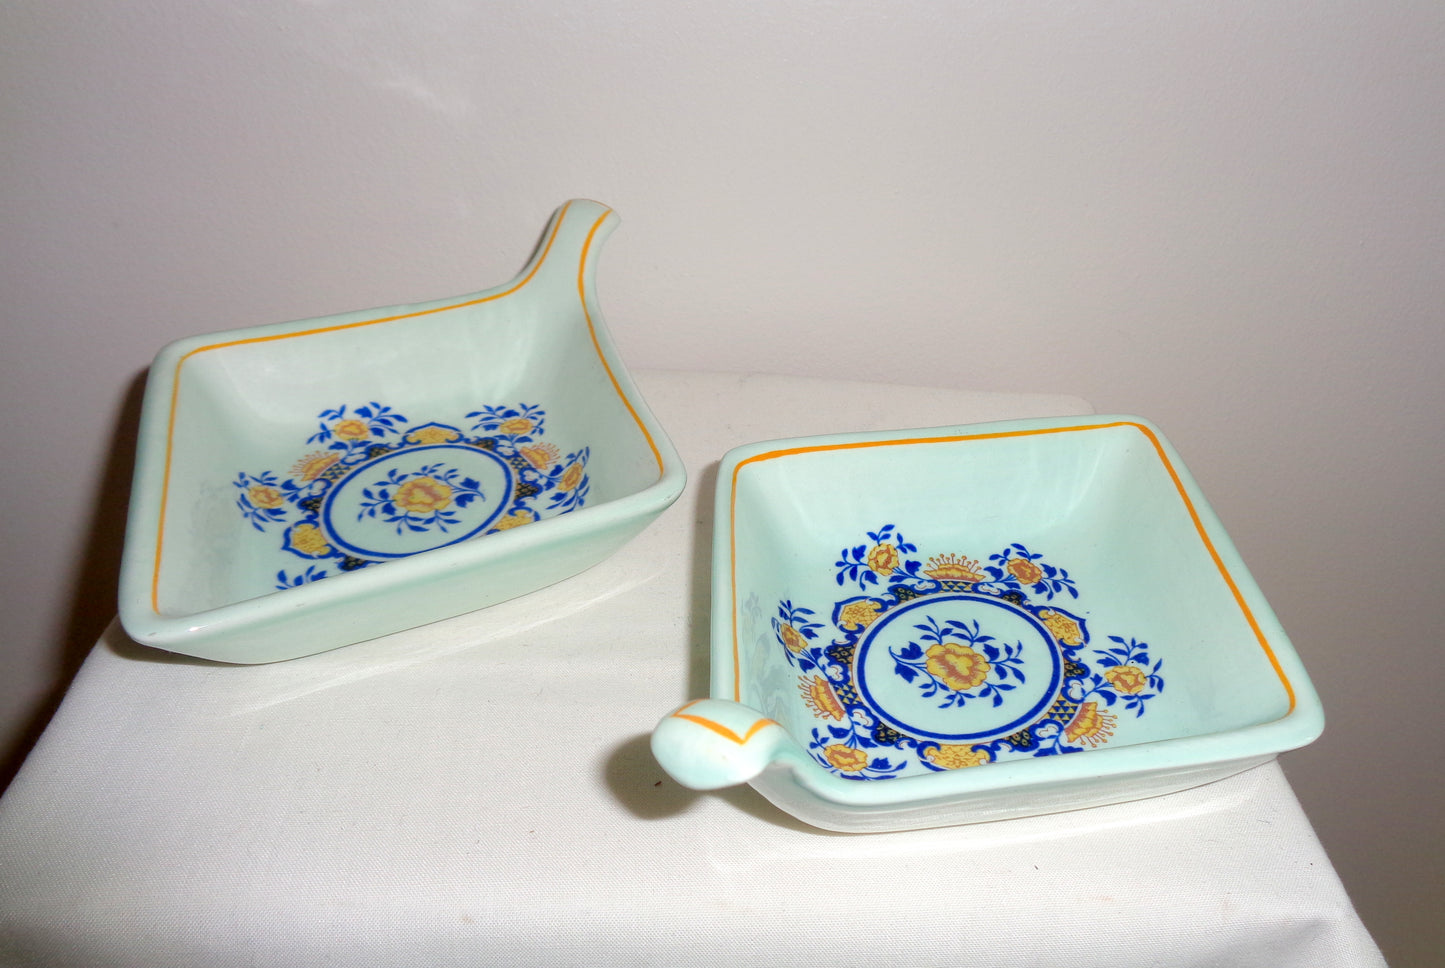 1960s Adams Pottery Calyx Ware Shalimar Ashtray and Two Trinket Dishes